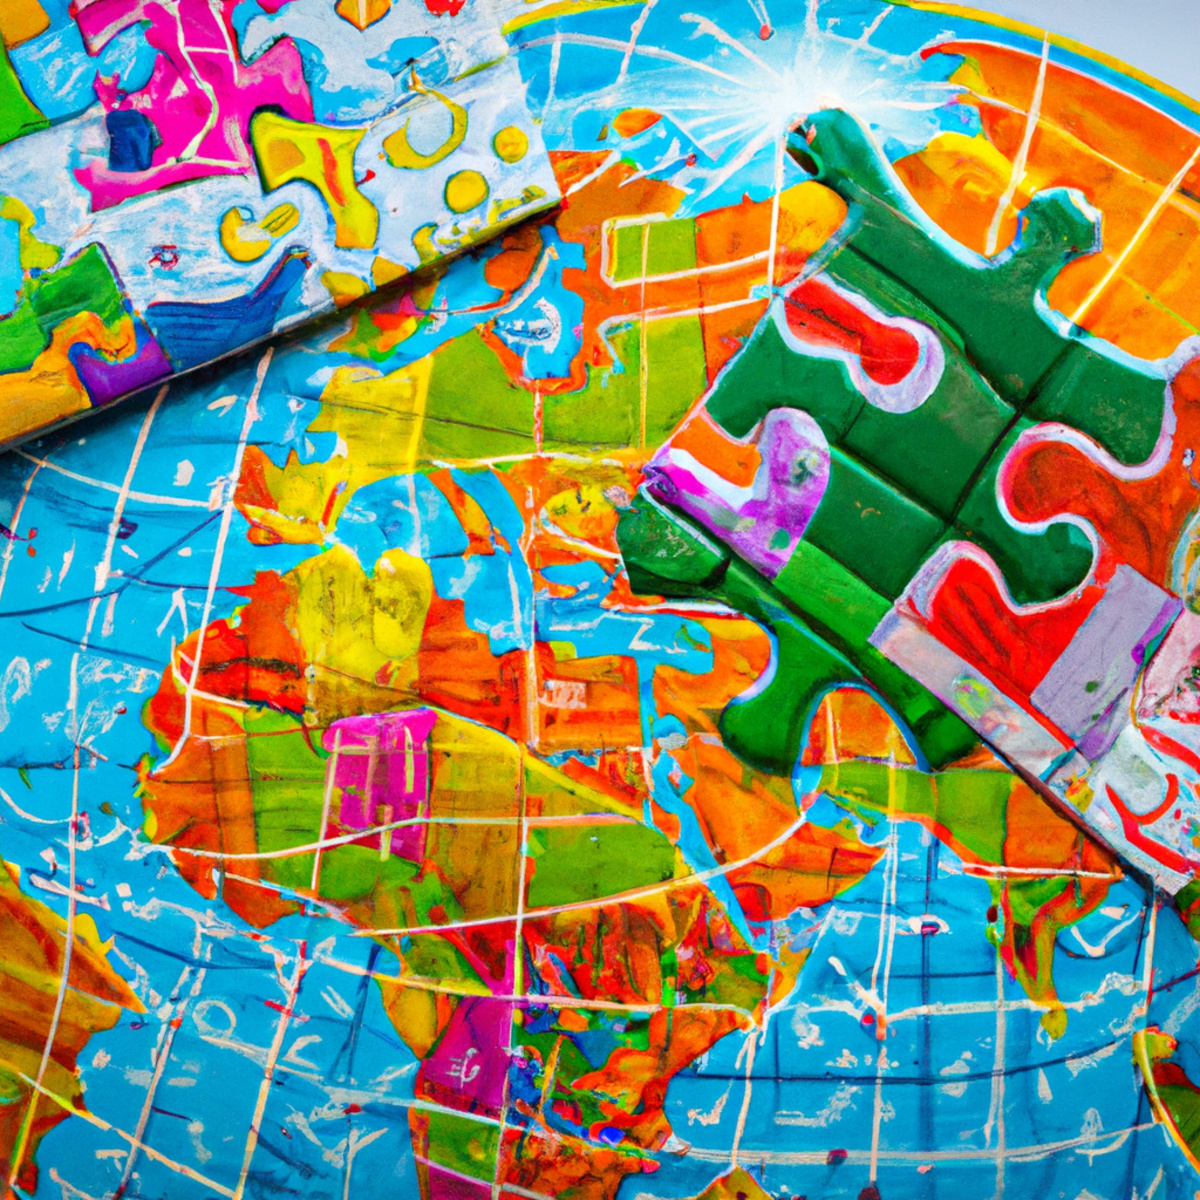 Close-up of colorful puzzle with educational symbols, representing unity and collaboration. Metaphor for raising awareness about Treacher Collins Syndrome and the importance of education in supporting affected individuals.